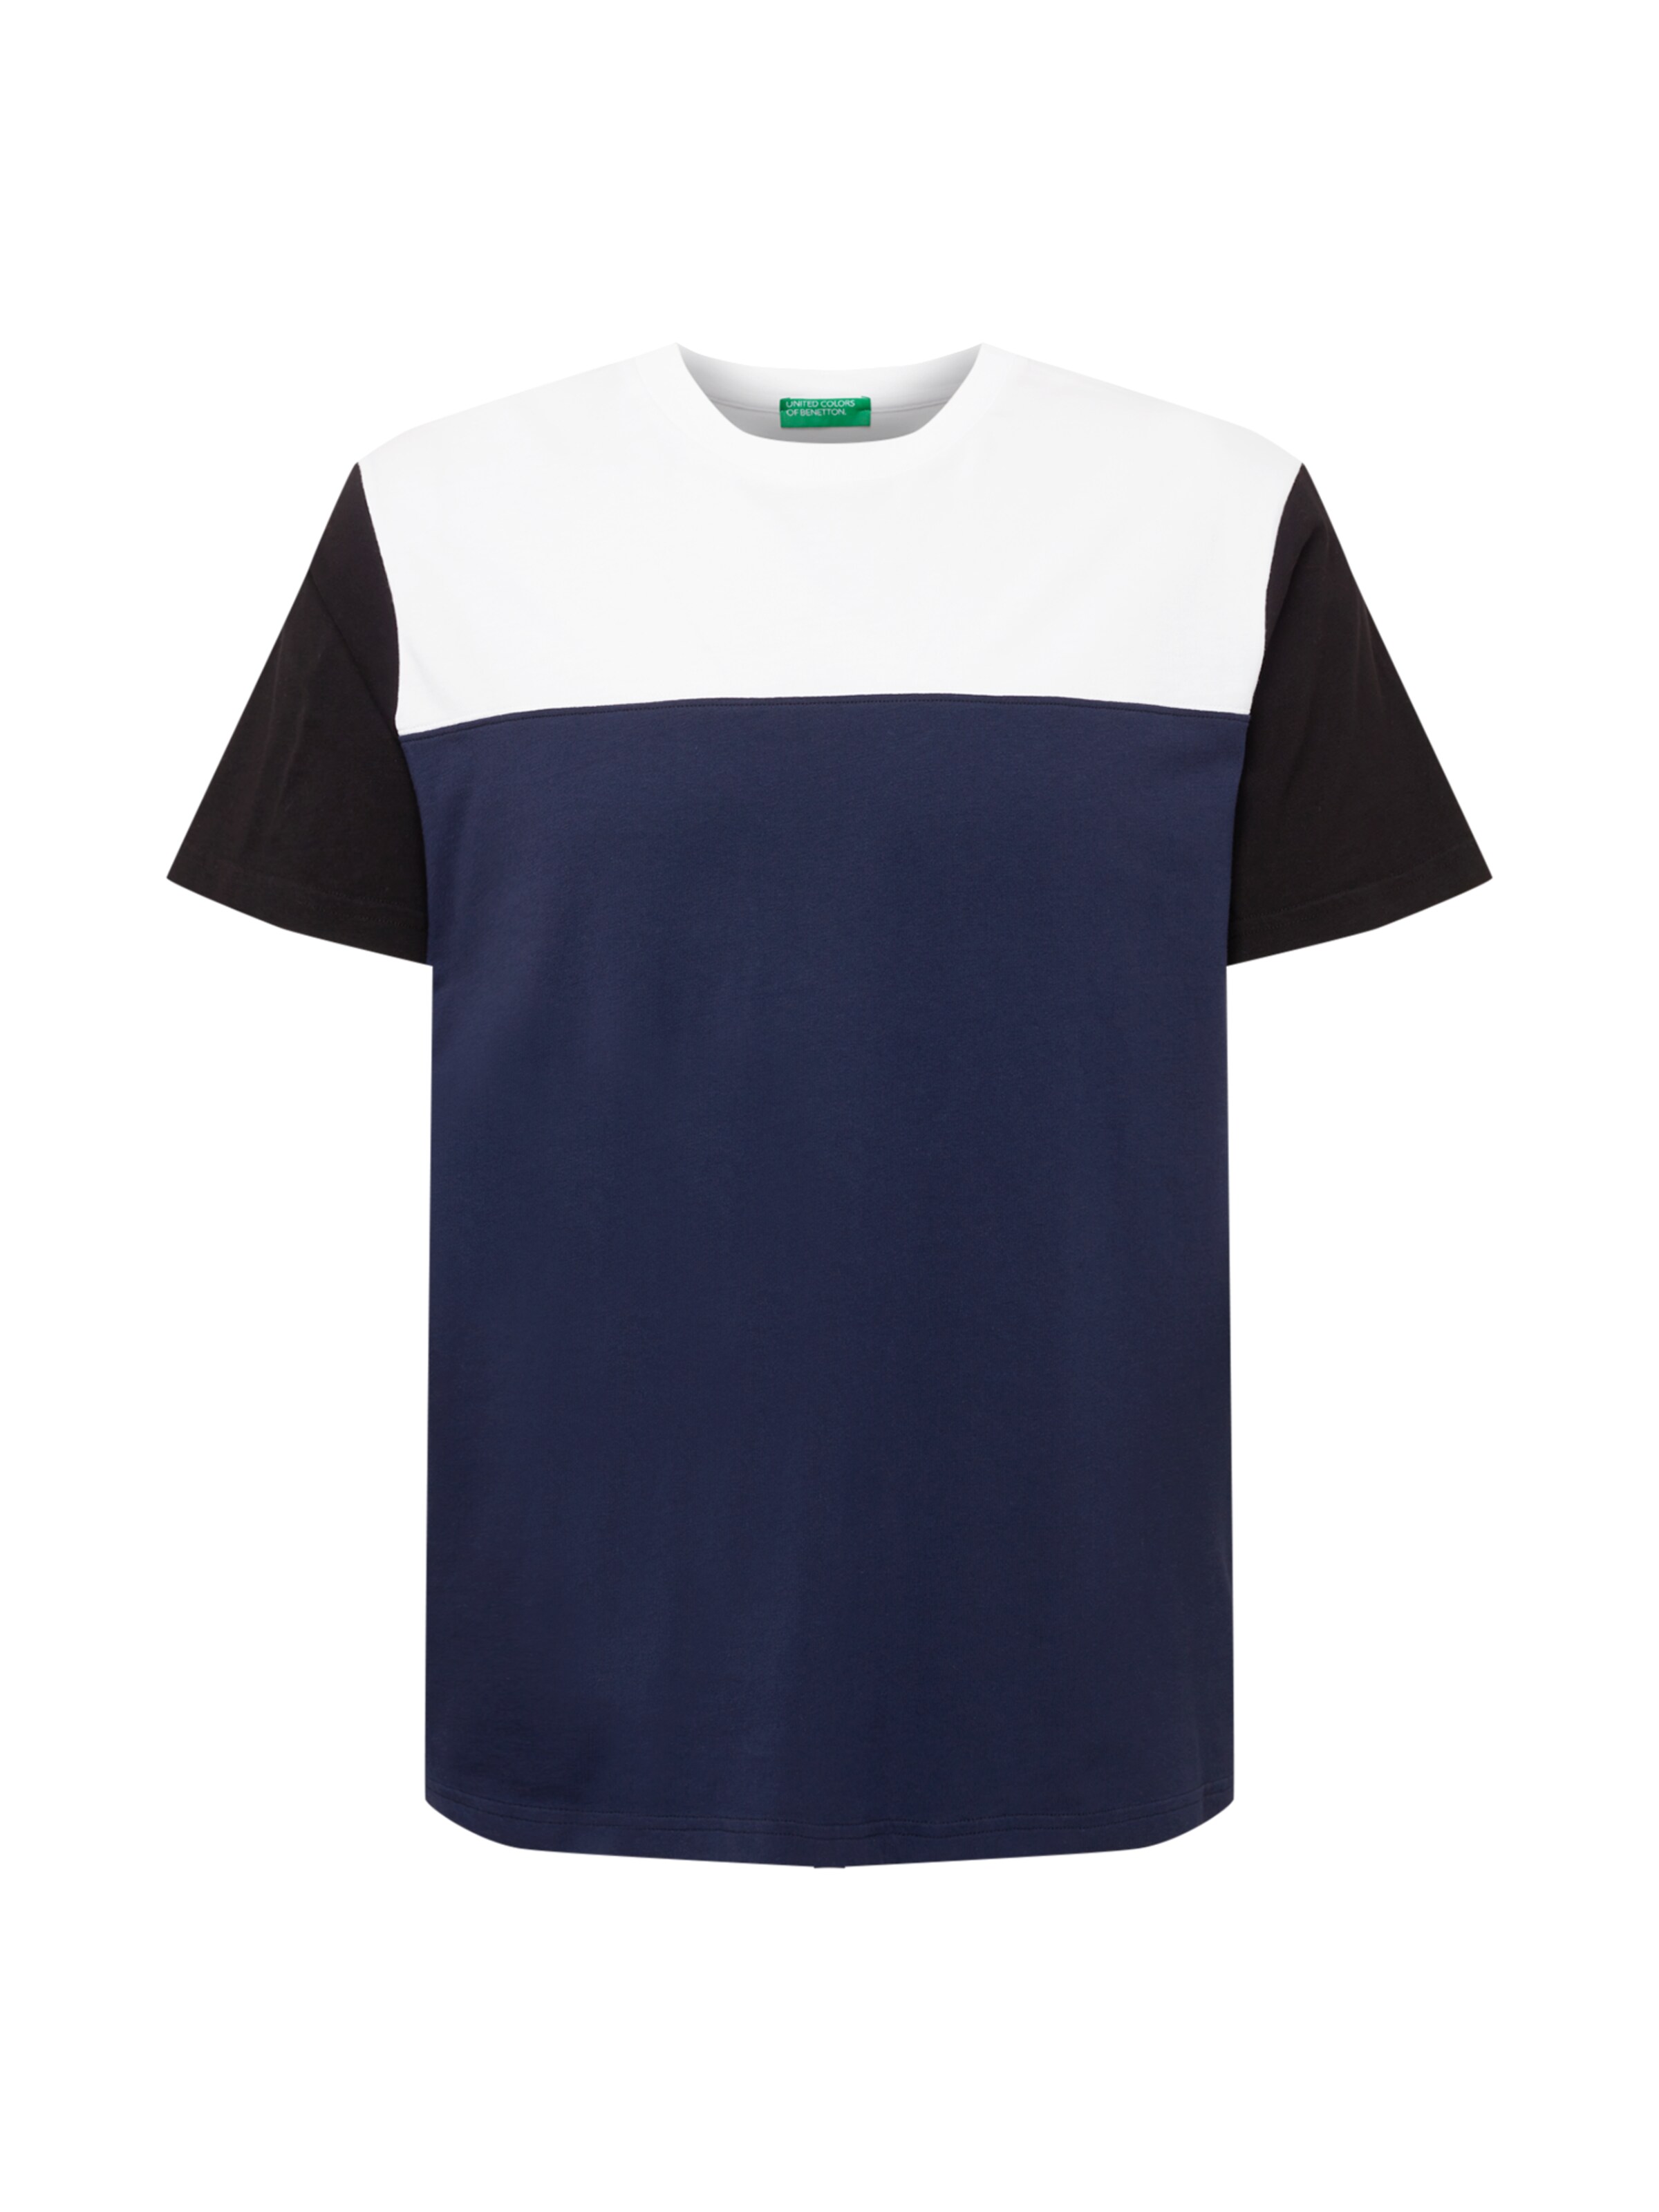 Männer Shirts UNITED COLORS OF BENETTON T-Shirt in Navy - JP00690